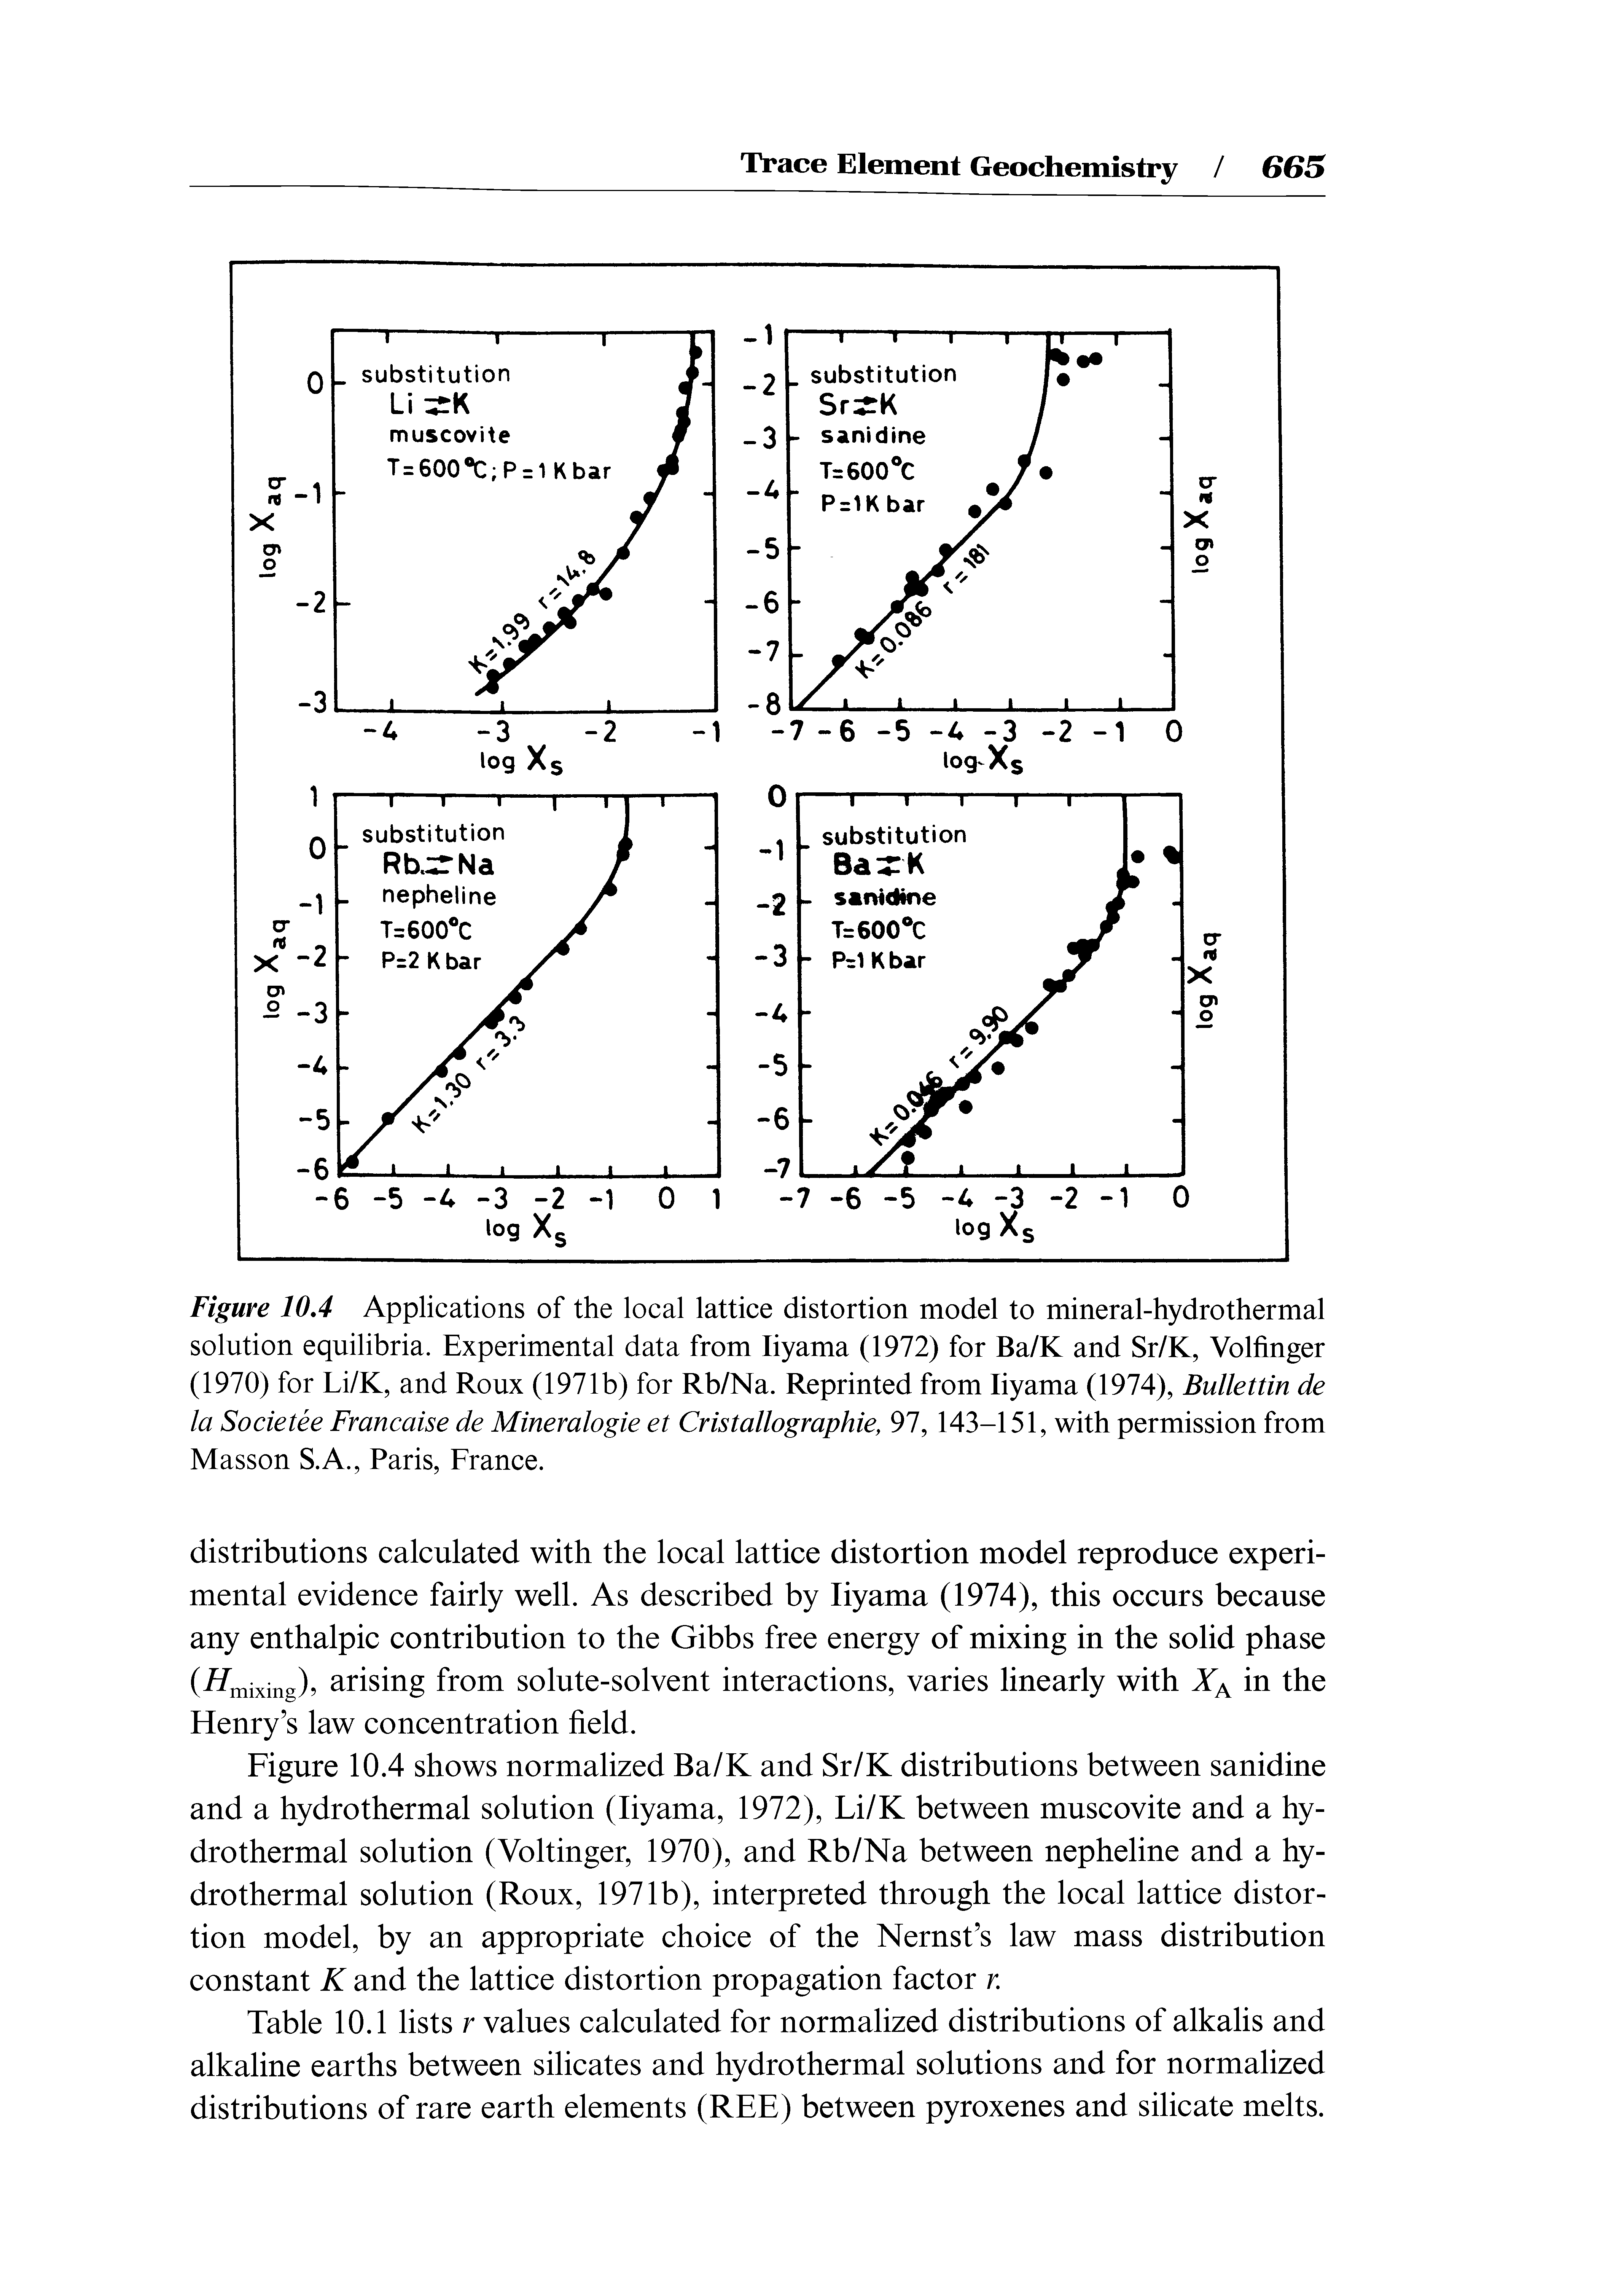 Figure 10,4 Applications of the local lattice distortion model to mineral-hydrothermal solution equilibria. Experimental data from liyama (1972) for Ba/K and Sr/K, Volfinger (1970) for Li/K, and Roux (1971b) for Rb/Na. Reprinted from liyama (1974), Bullettin de la Societee Francaise de Mineralogie et Cristallographie, 97, 143-151, with permission from Masson S.A., Paris, France.